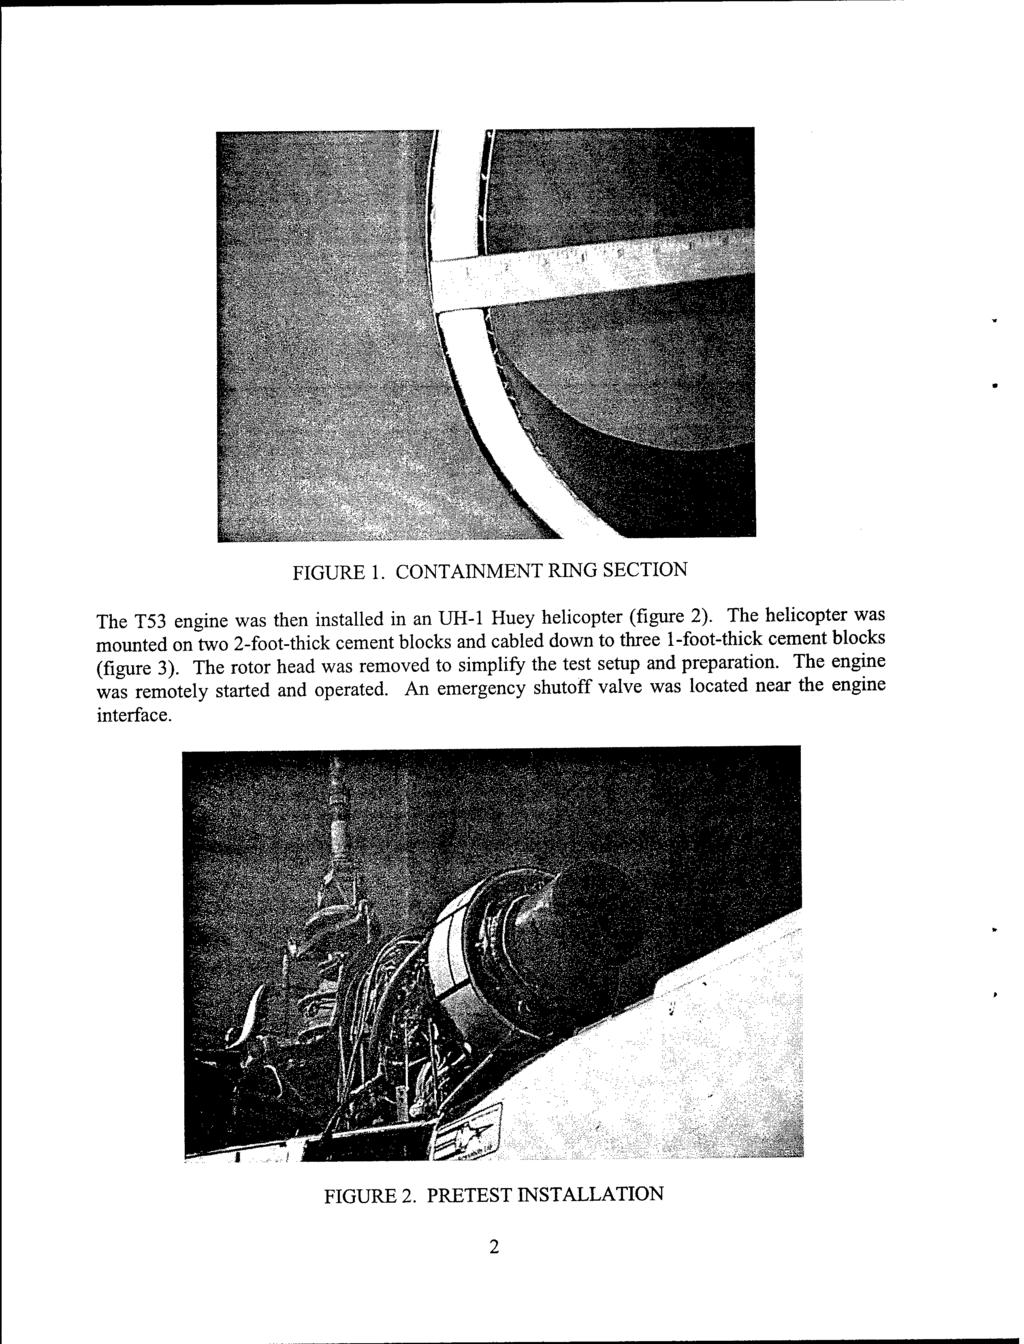 FIGURE 1. CONTAINMENT RING SECTION The T53 engine was then installed in an UH-1 Huey helicopter (figure 2).